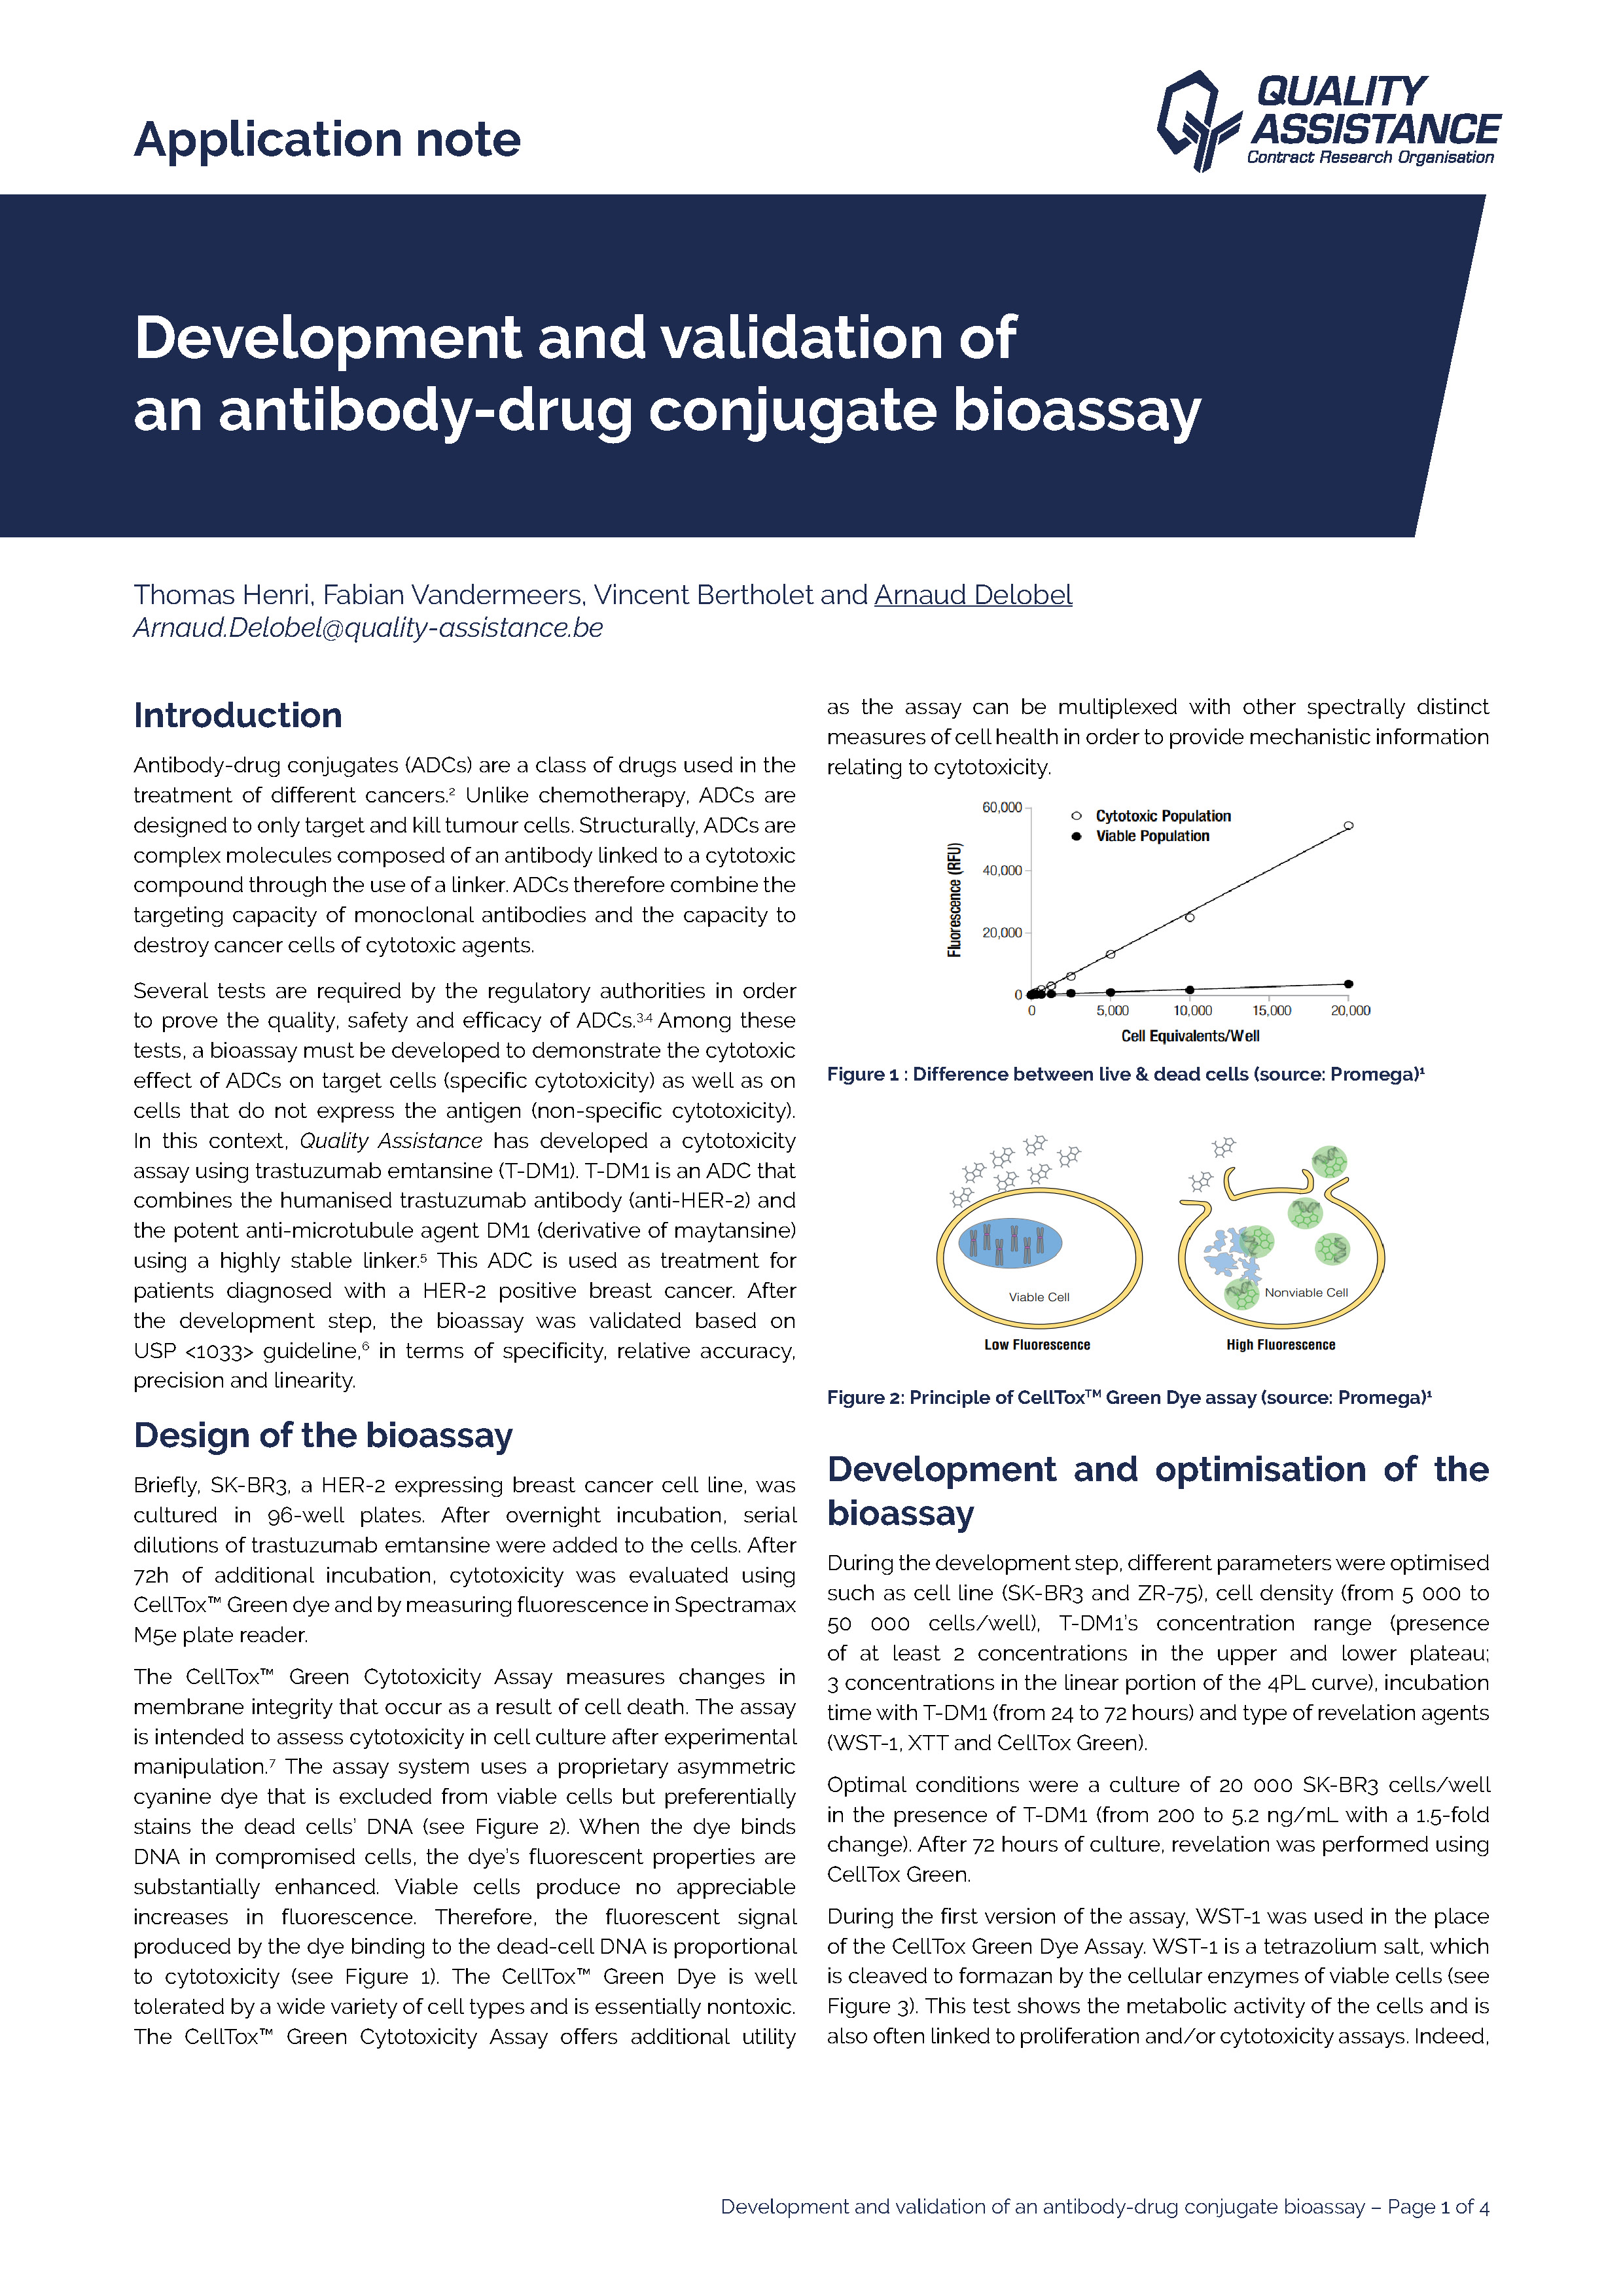 Quality-Assistance-Application-note-bioassay